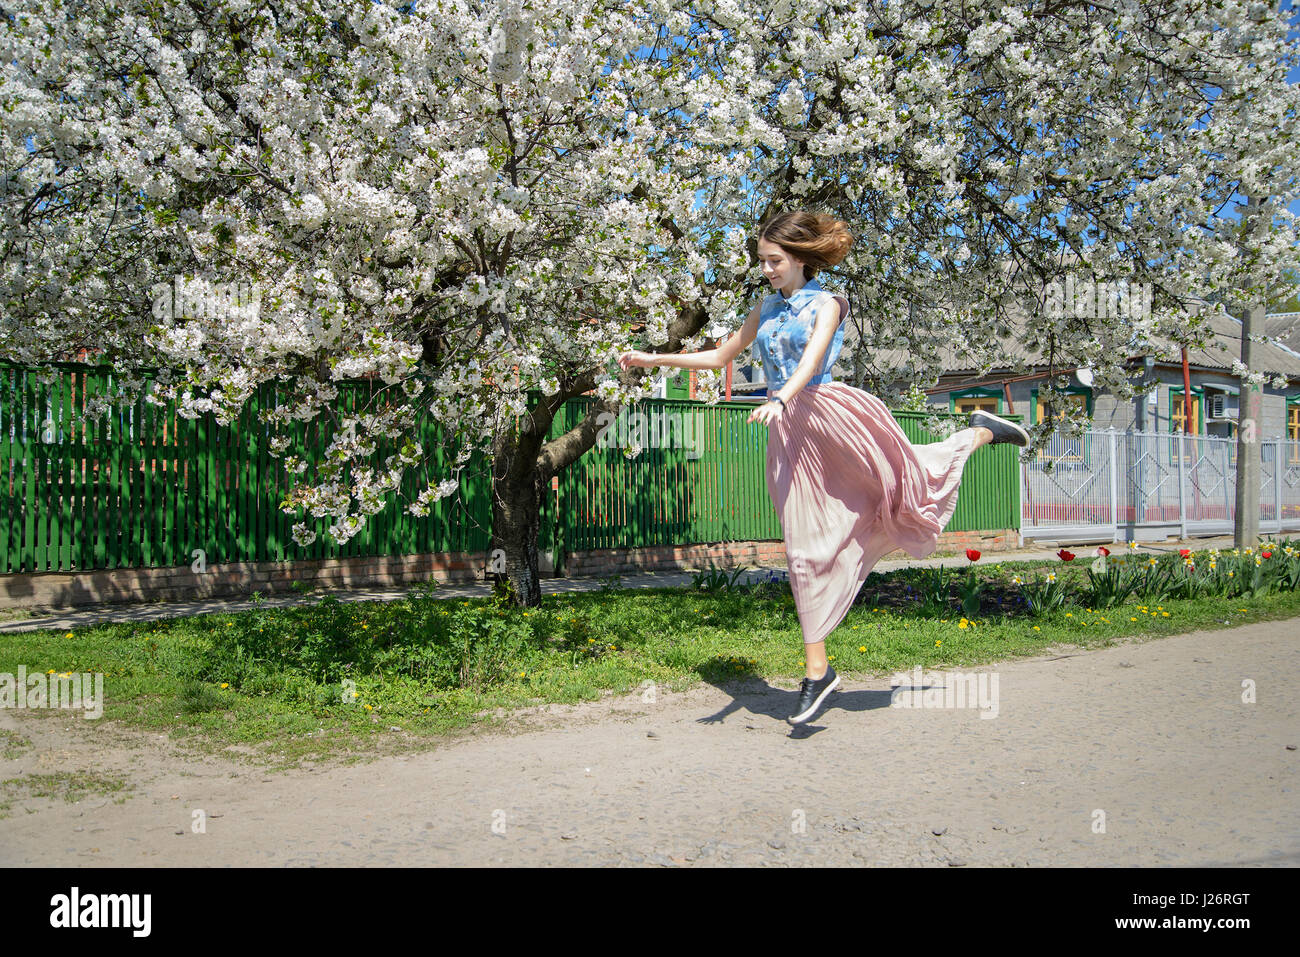 A young girl runs, bouncing against the background of a blossoming cherry tree Stock Photo